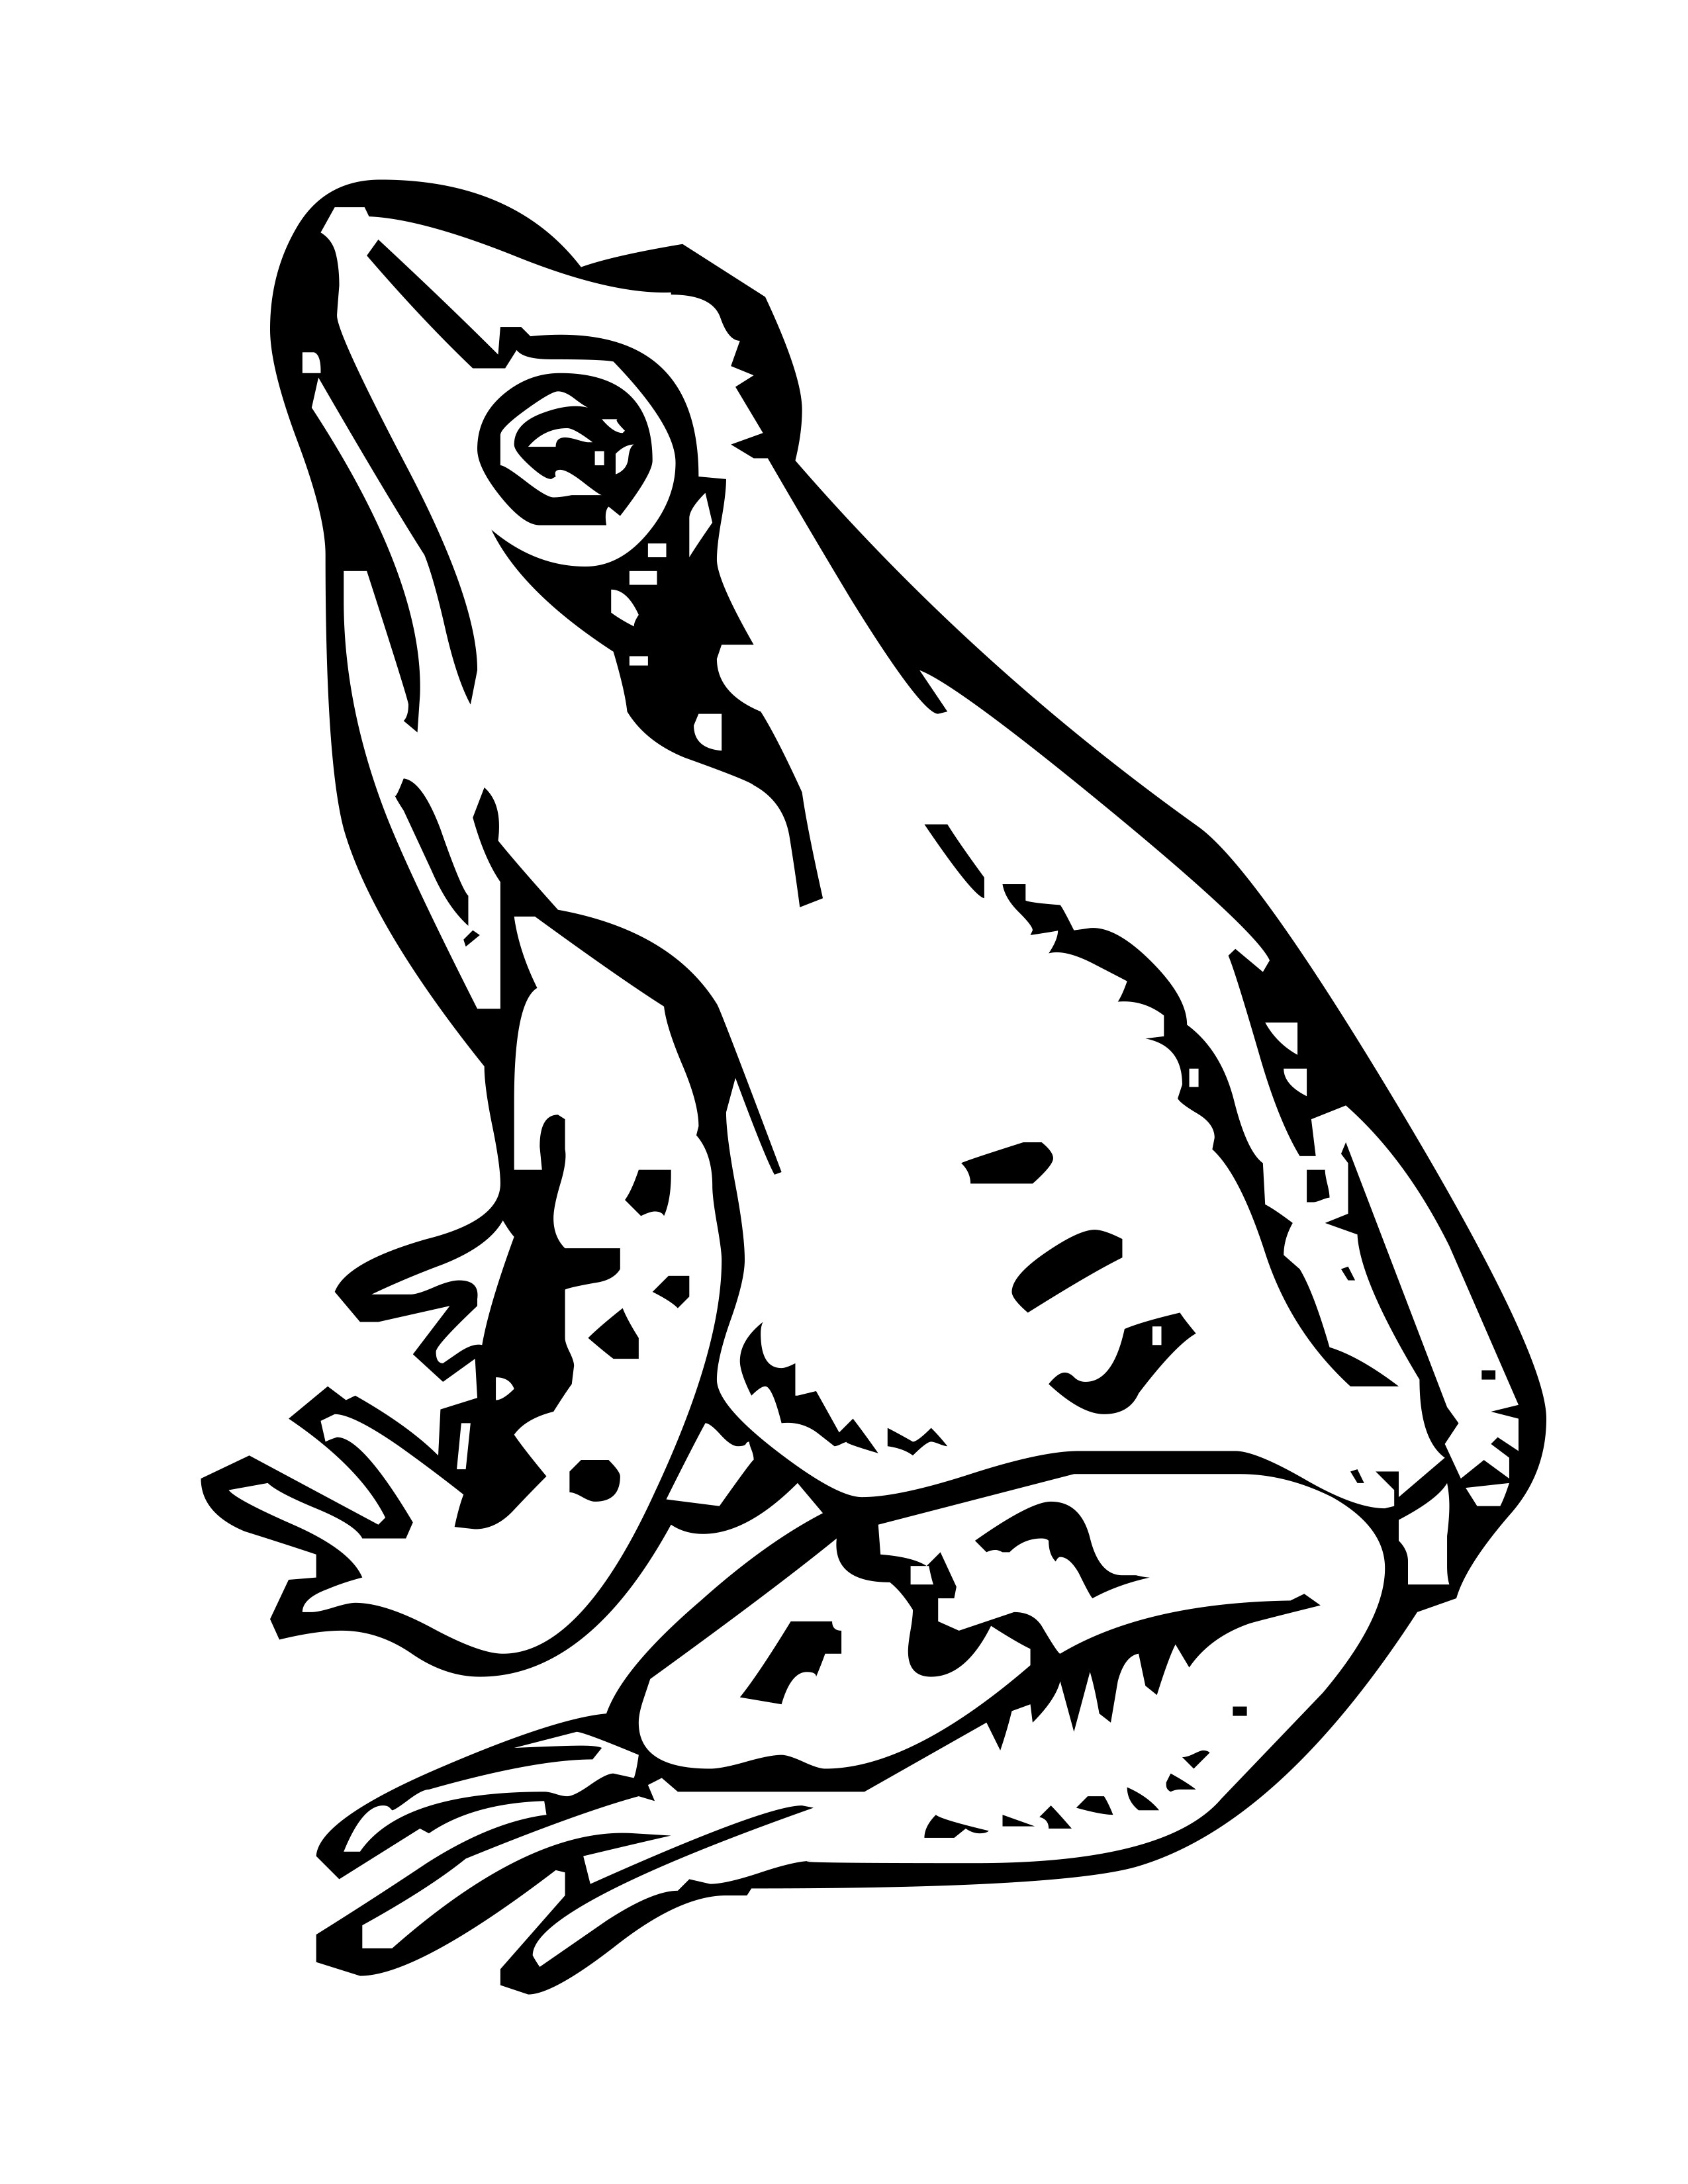 Rainforest Frog Coloring Page Coloring Pages Of Tree Frog Princess And Tadpoles On Lily Pad